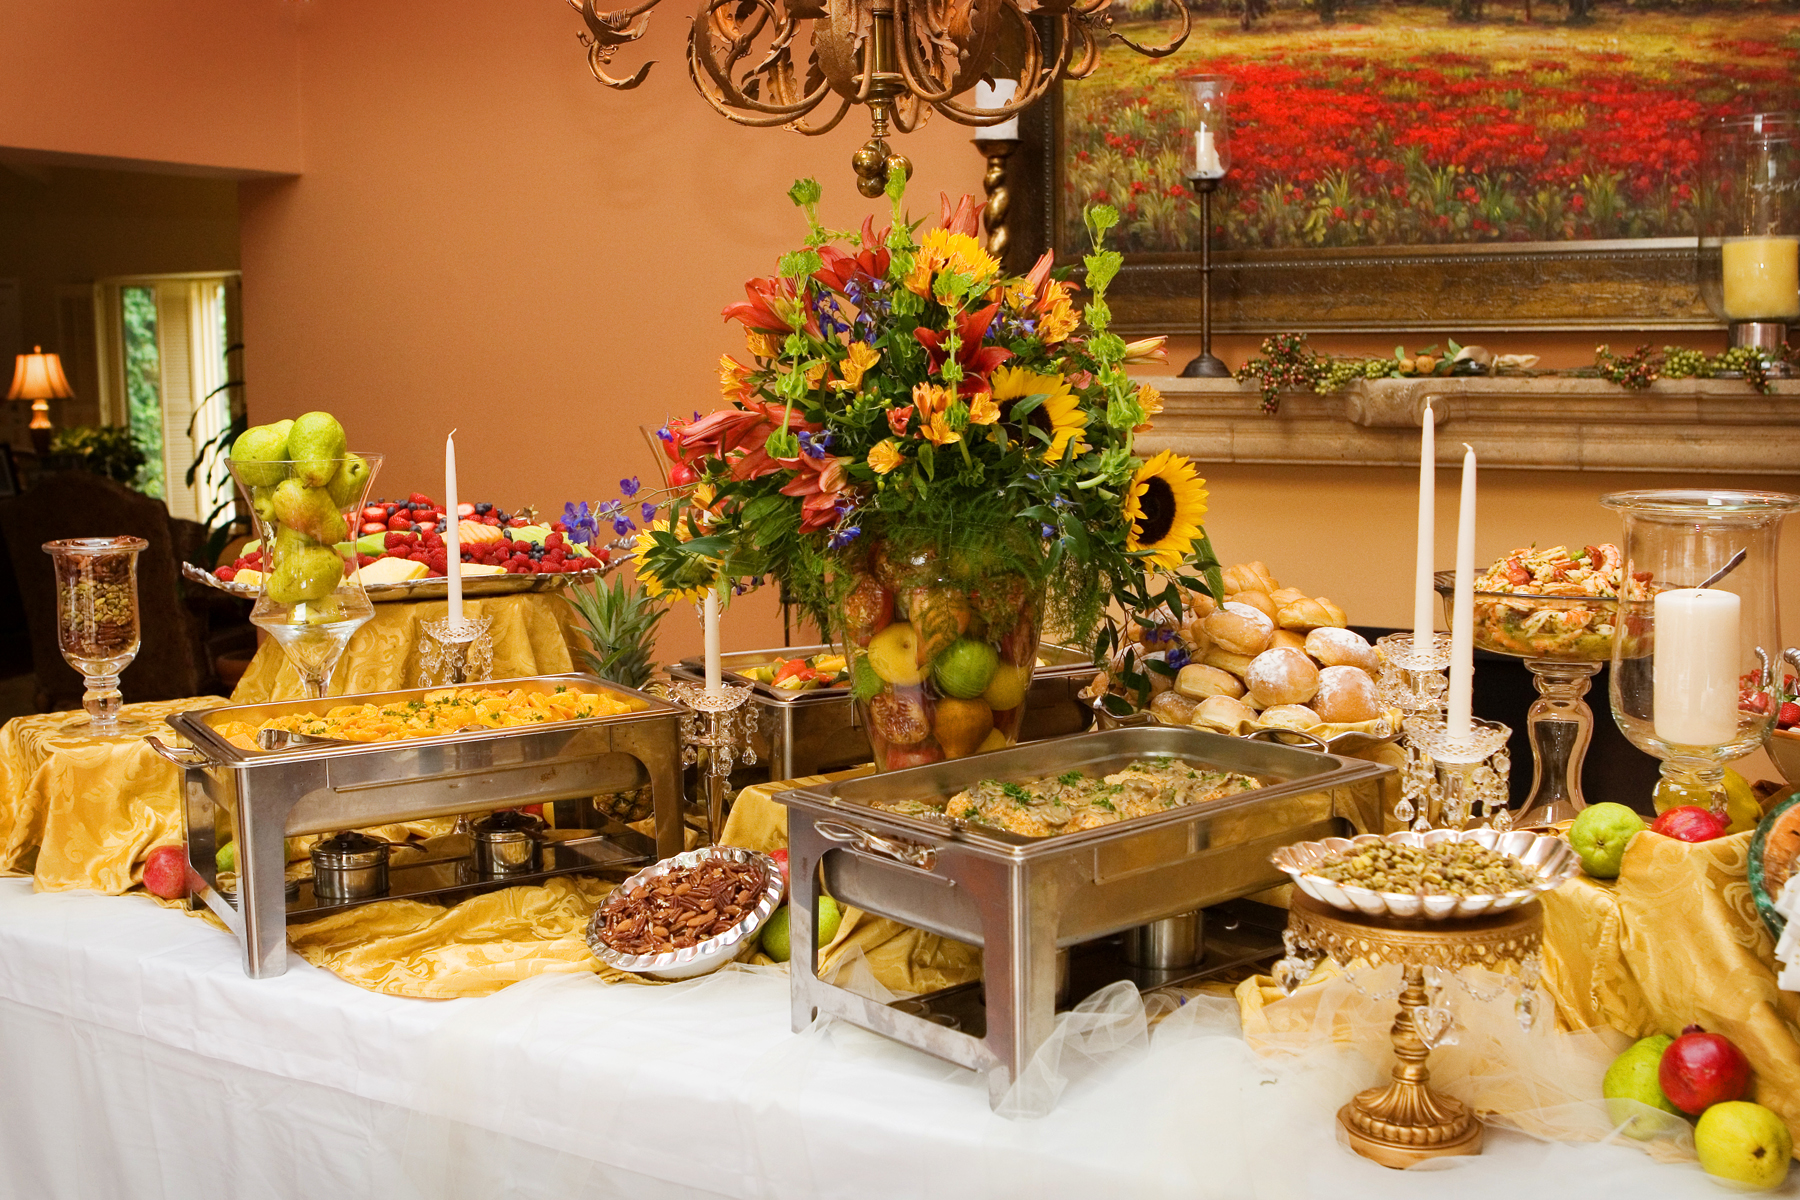 Catering Palm Springs | Wedding Catering and Planning Palm Desert and Palm Springs, California